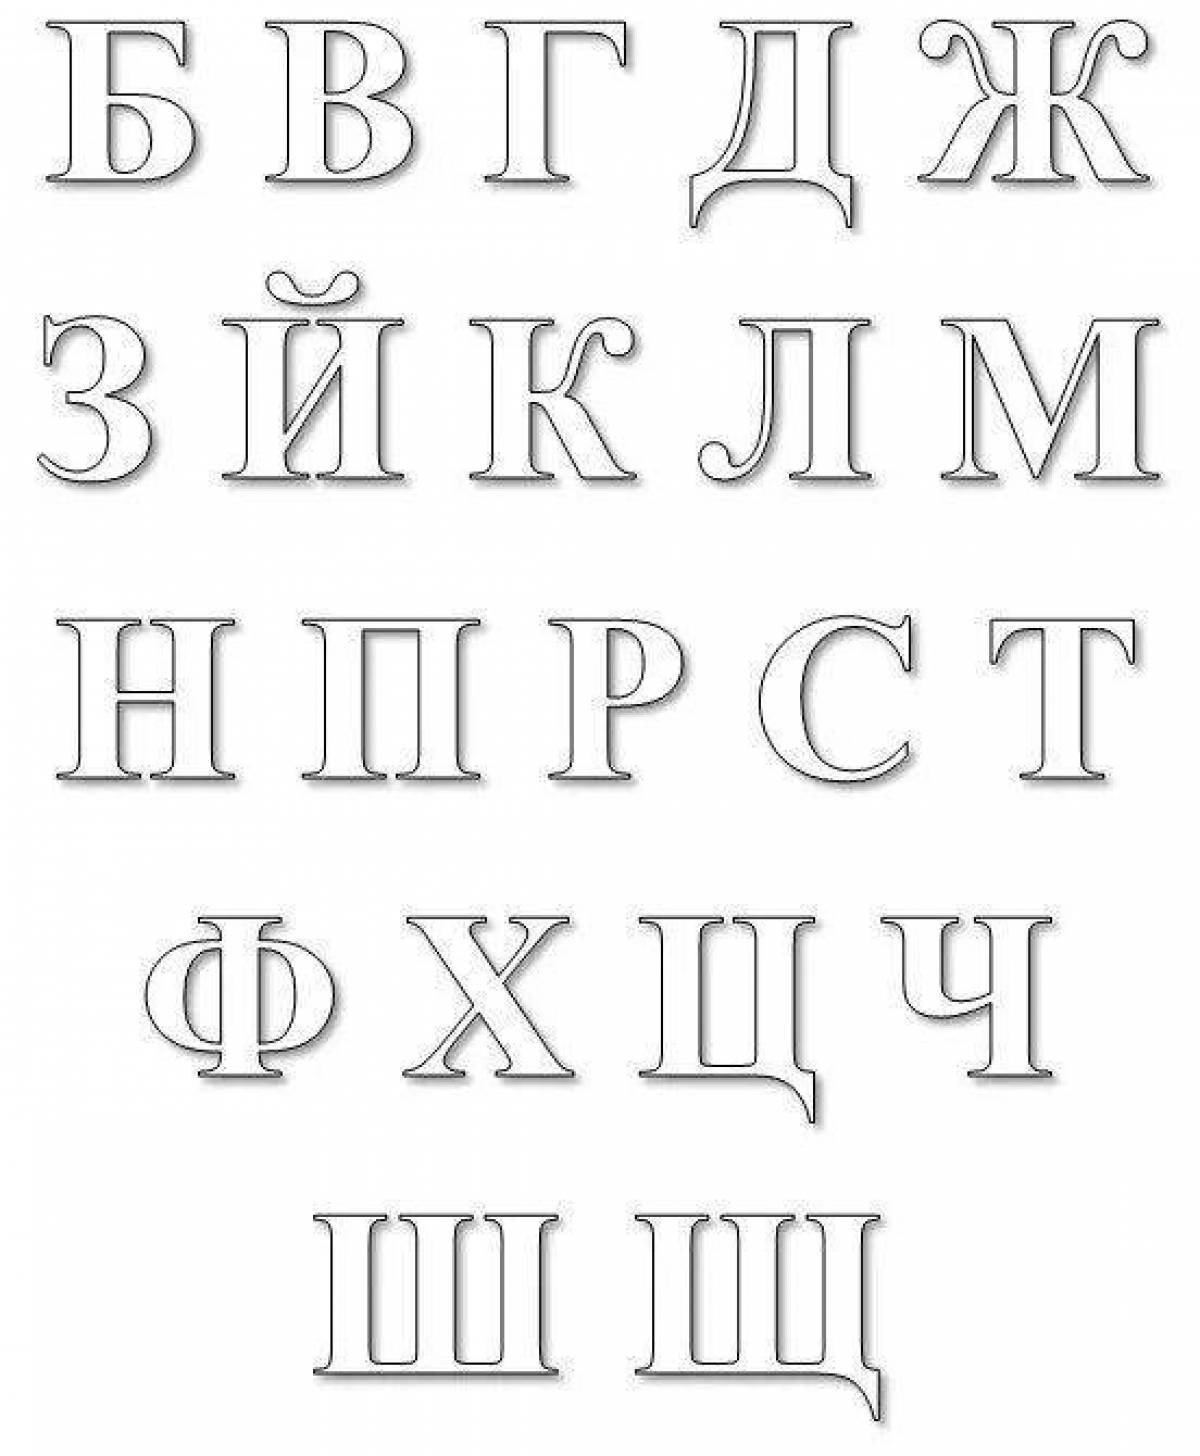 Coloring bright Russian letters